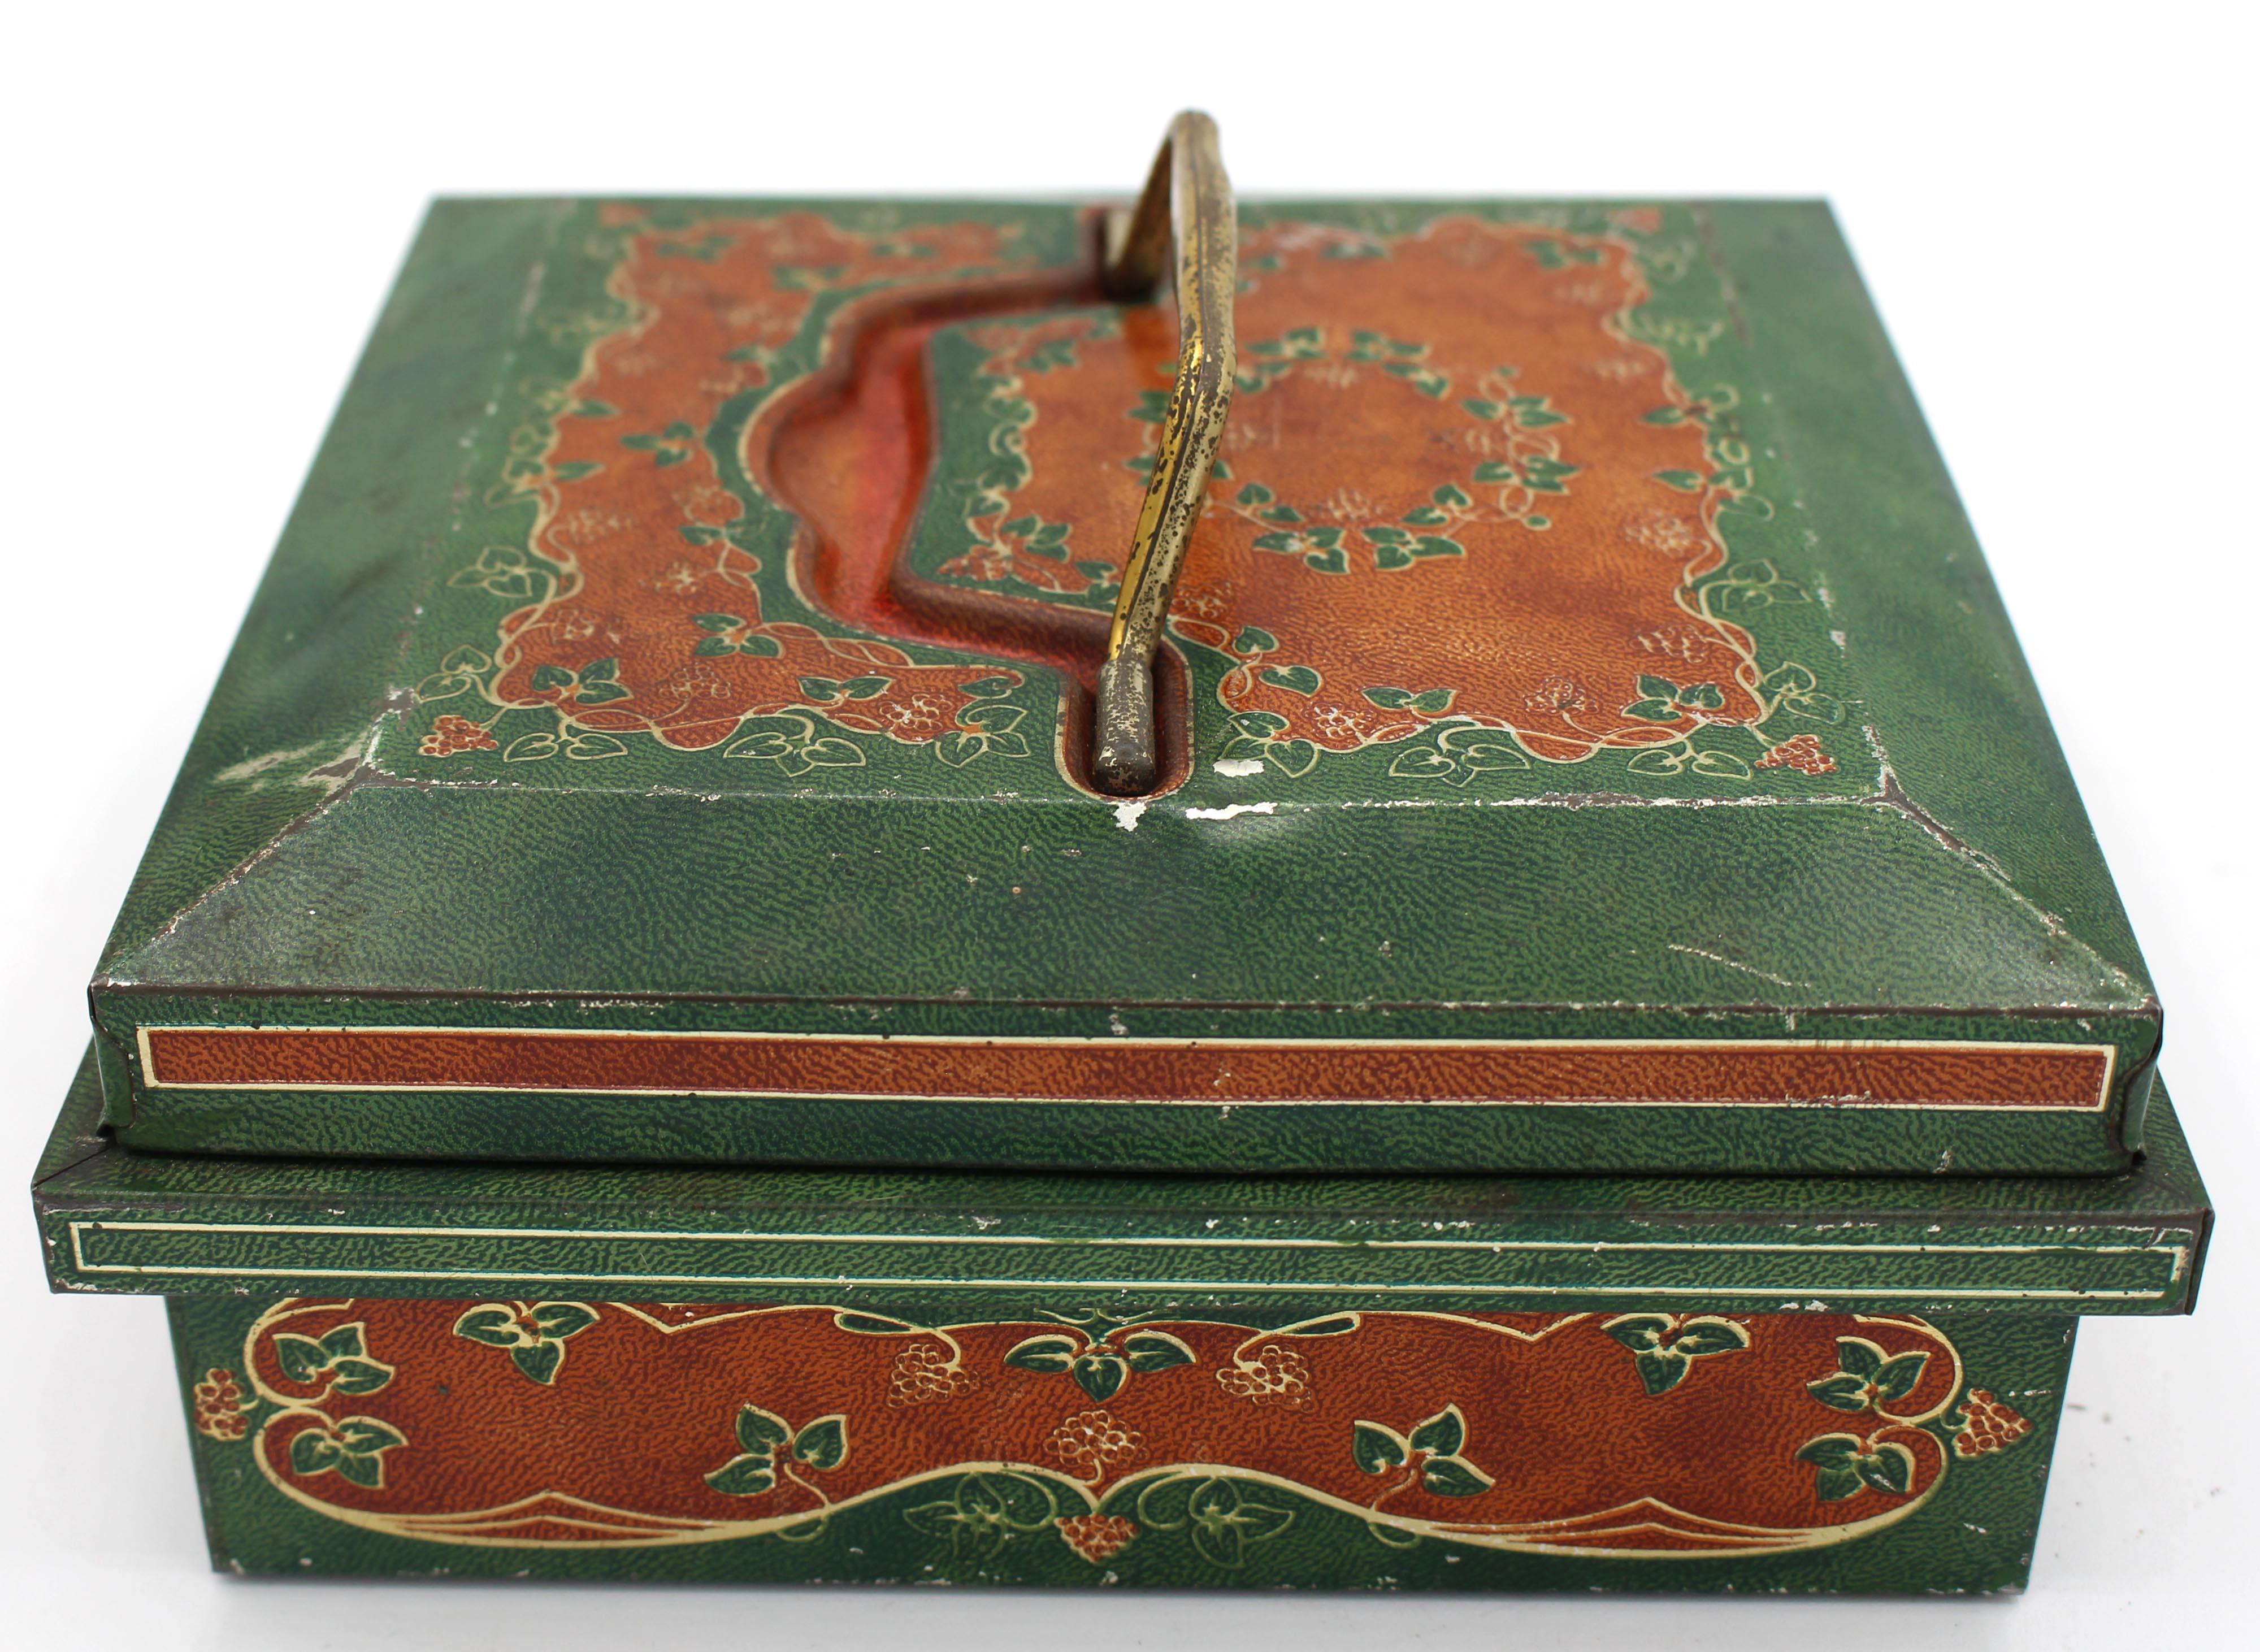 1903 Huntley & Palmers Jewelry Casket Form Biscuit Tin Box In Good Condition For Sale In Chapel Hill, NC